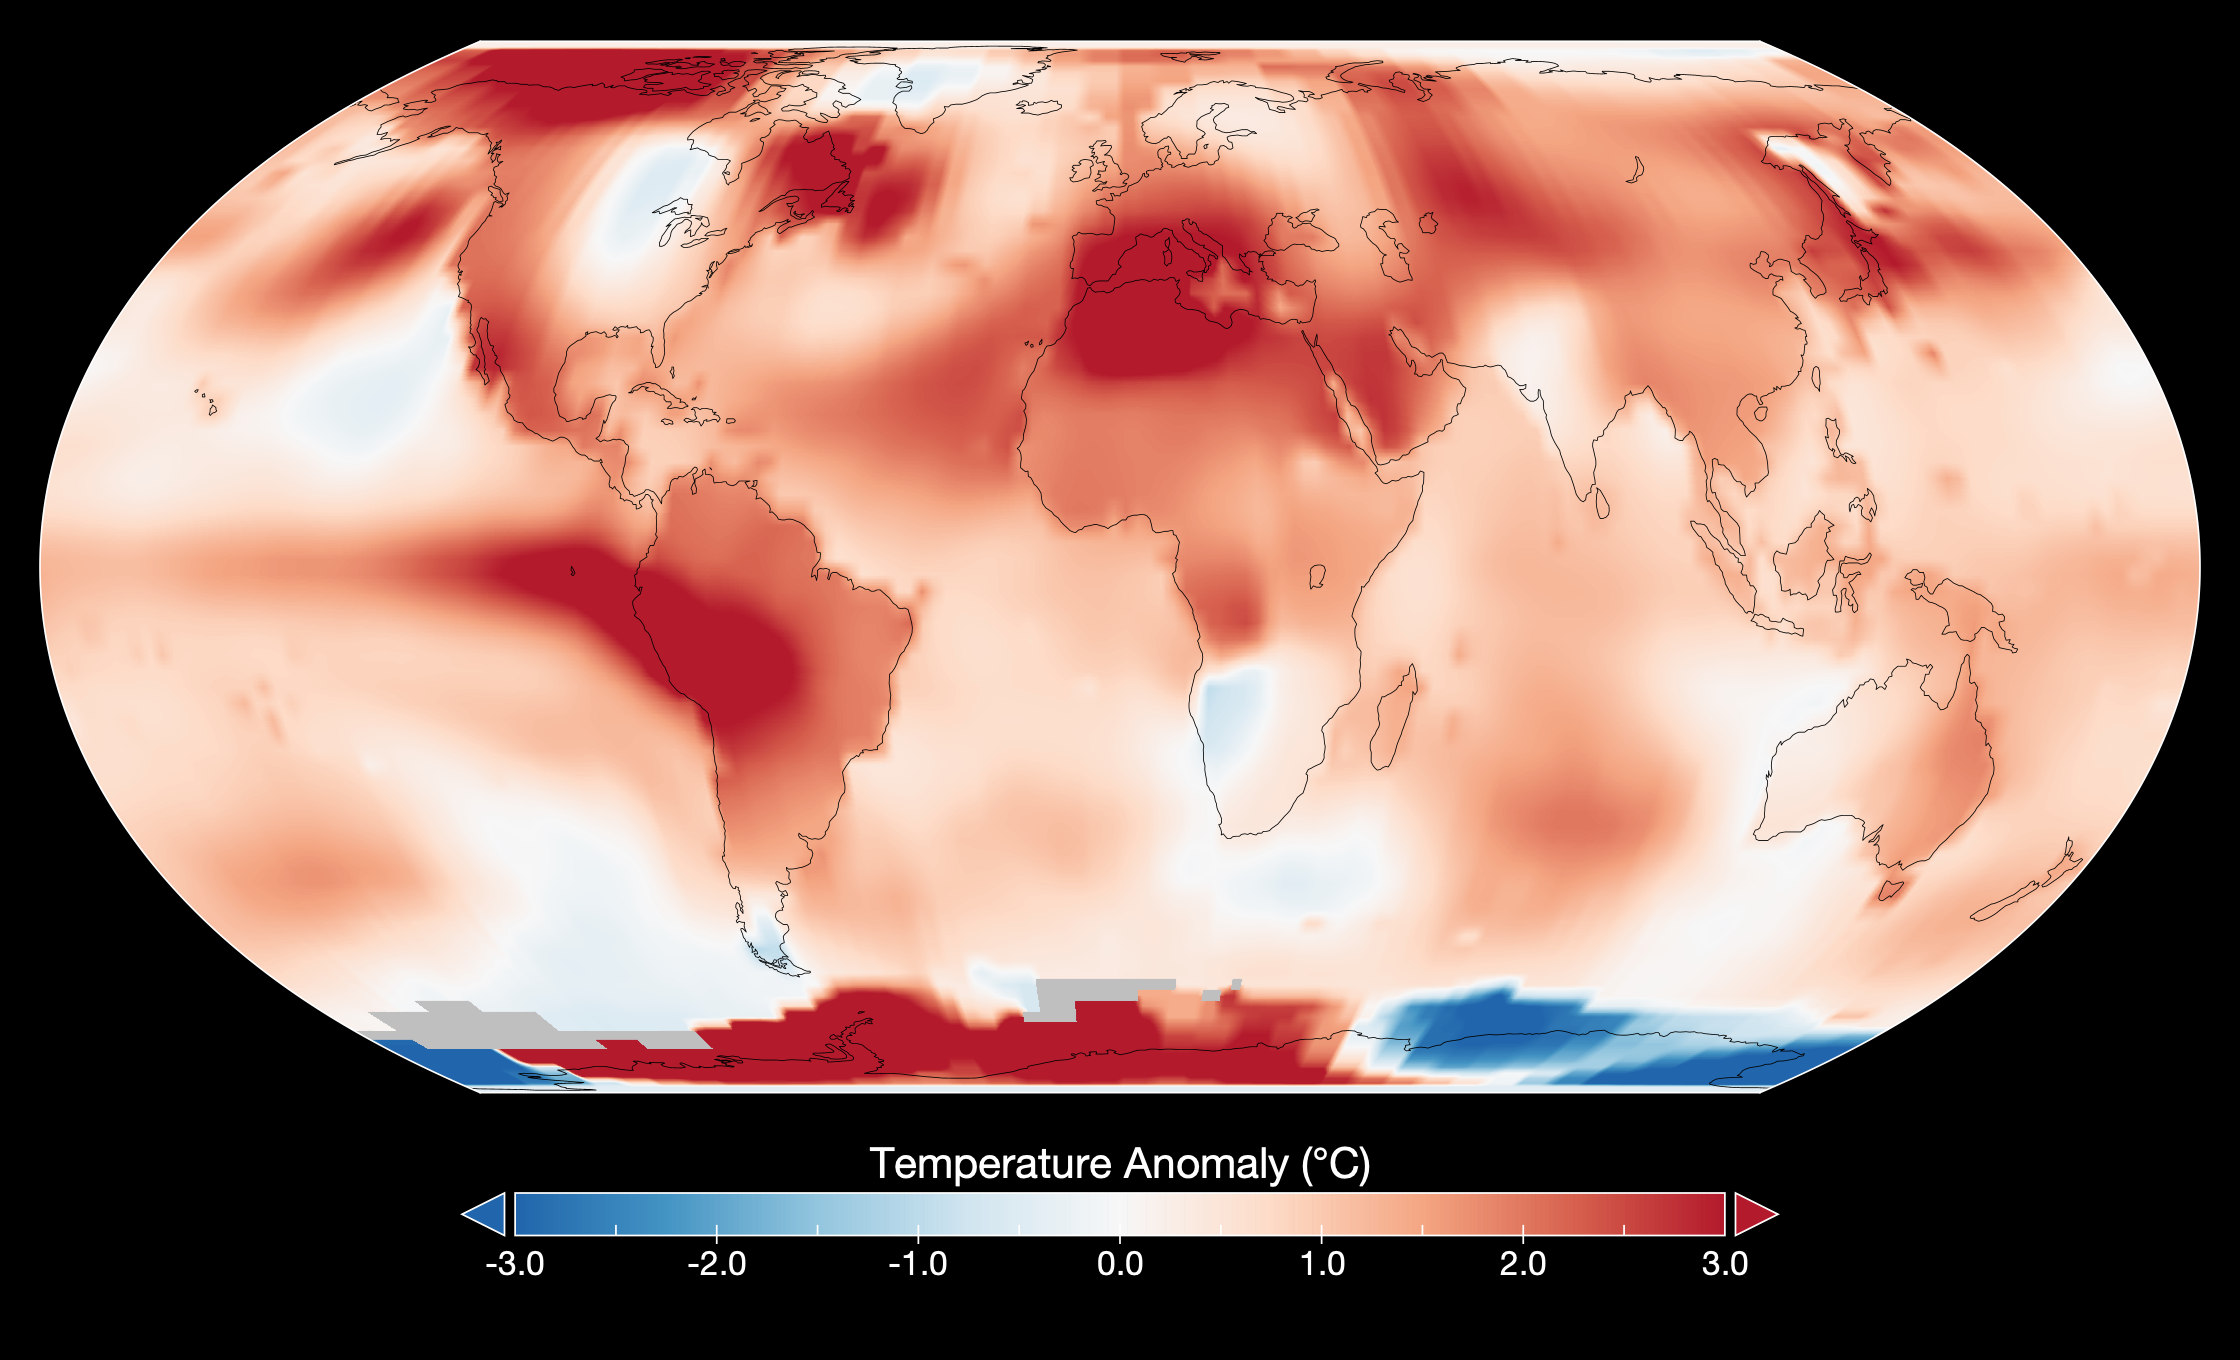 This map shows global temperature anomalies for July 2023 according to the GISTEMP analysis by scientists at NASA’s Goddard Institute for Space Studies. Temperature anomalies reflect how July 2023 compared to the average July temperature from 1951-1980.